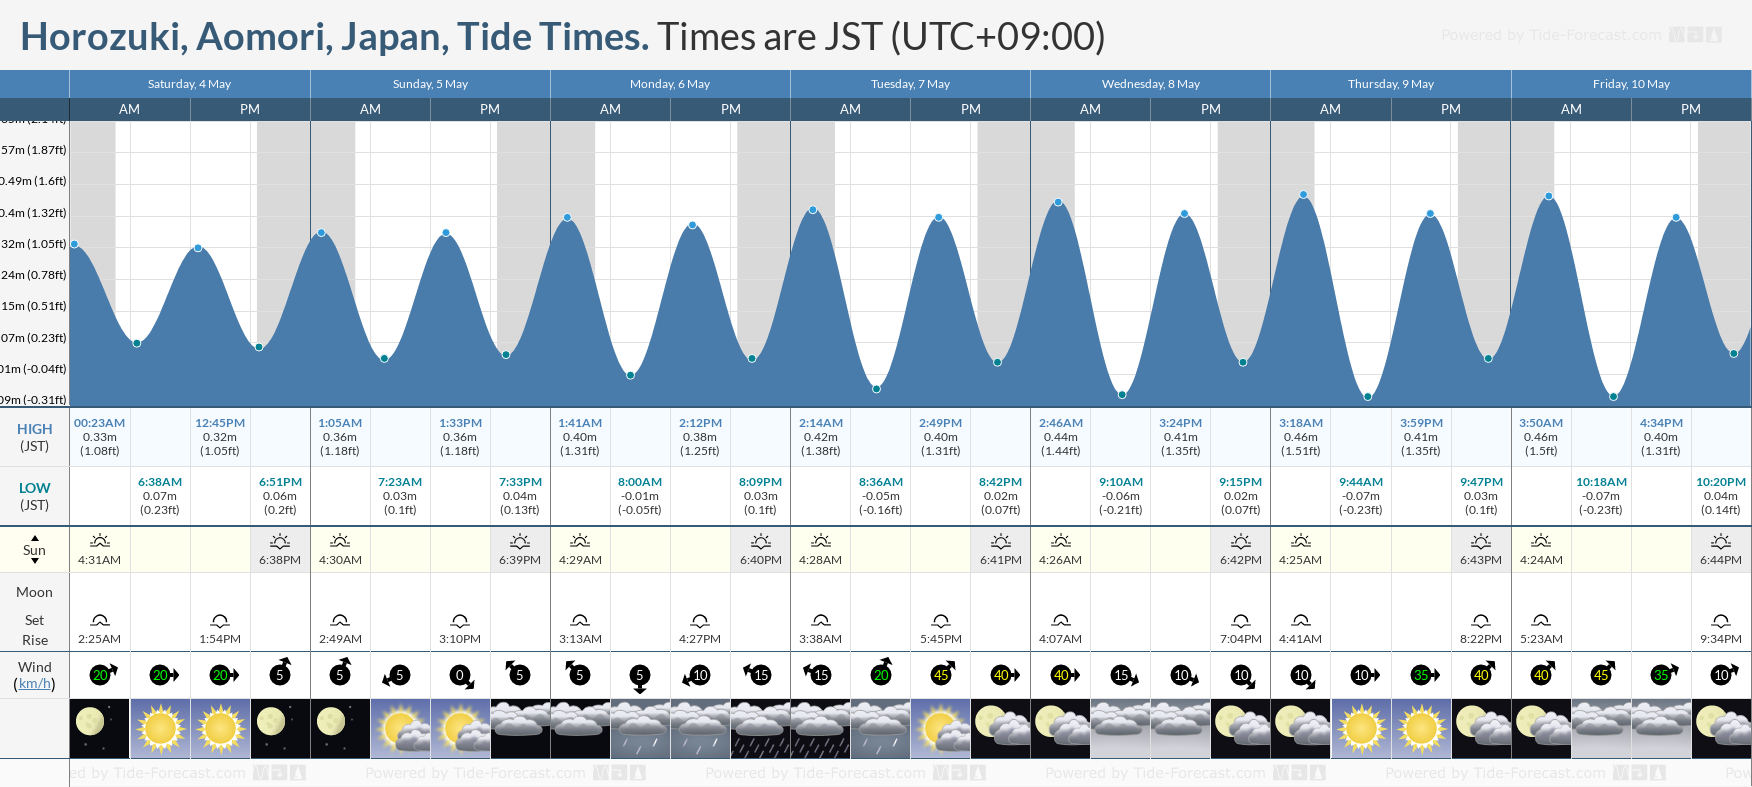 Horozuki, Aomori, Japan Tide Chart including high and low tide tide times for the next 7 days